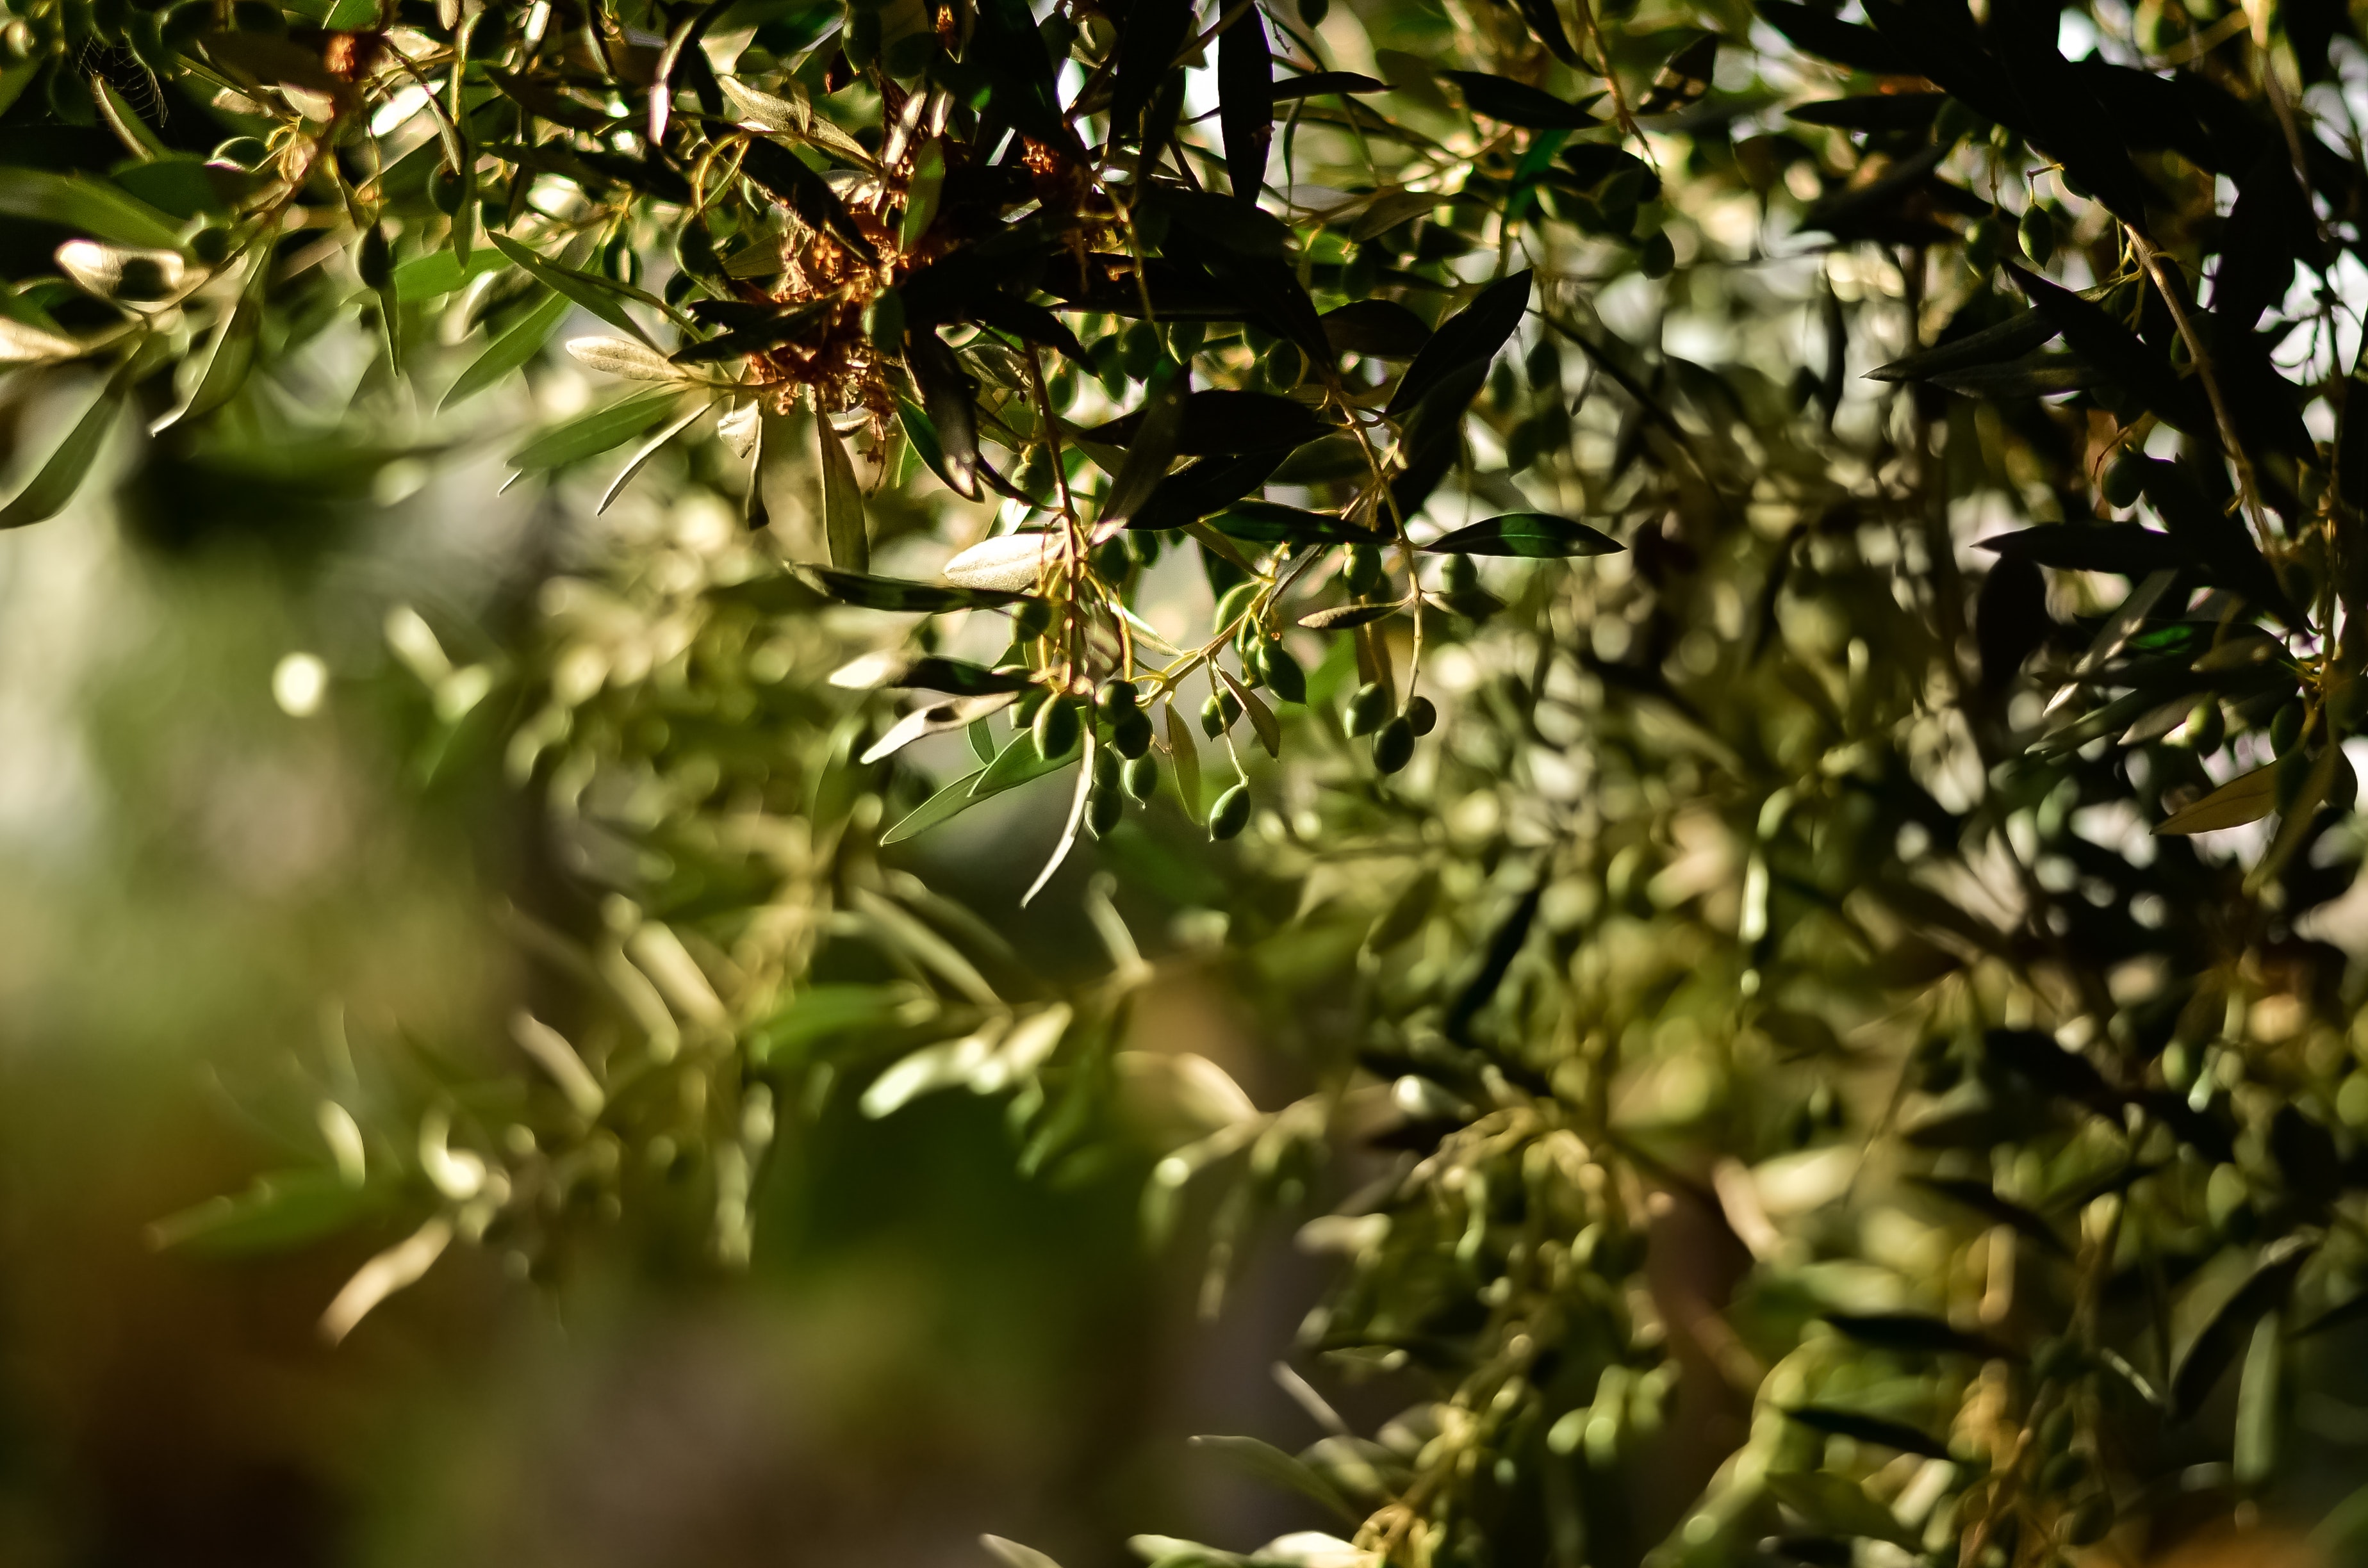 A new pest threatens the olive harvest of Palestine